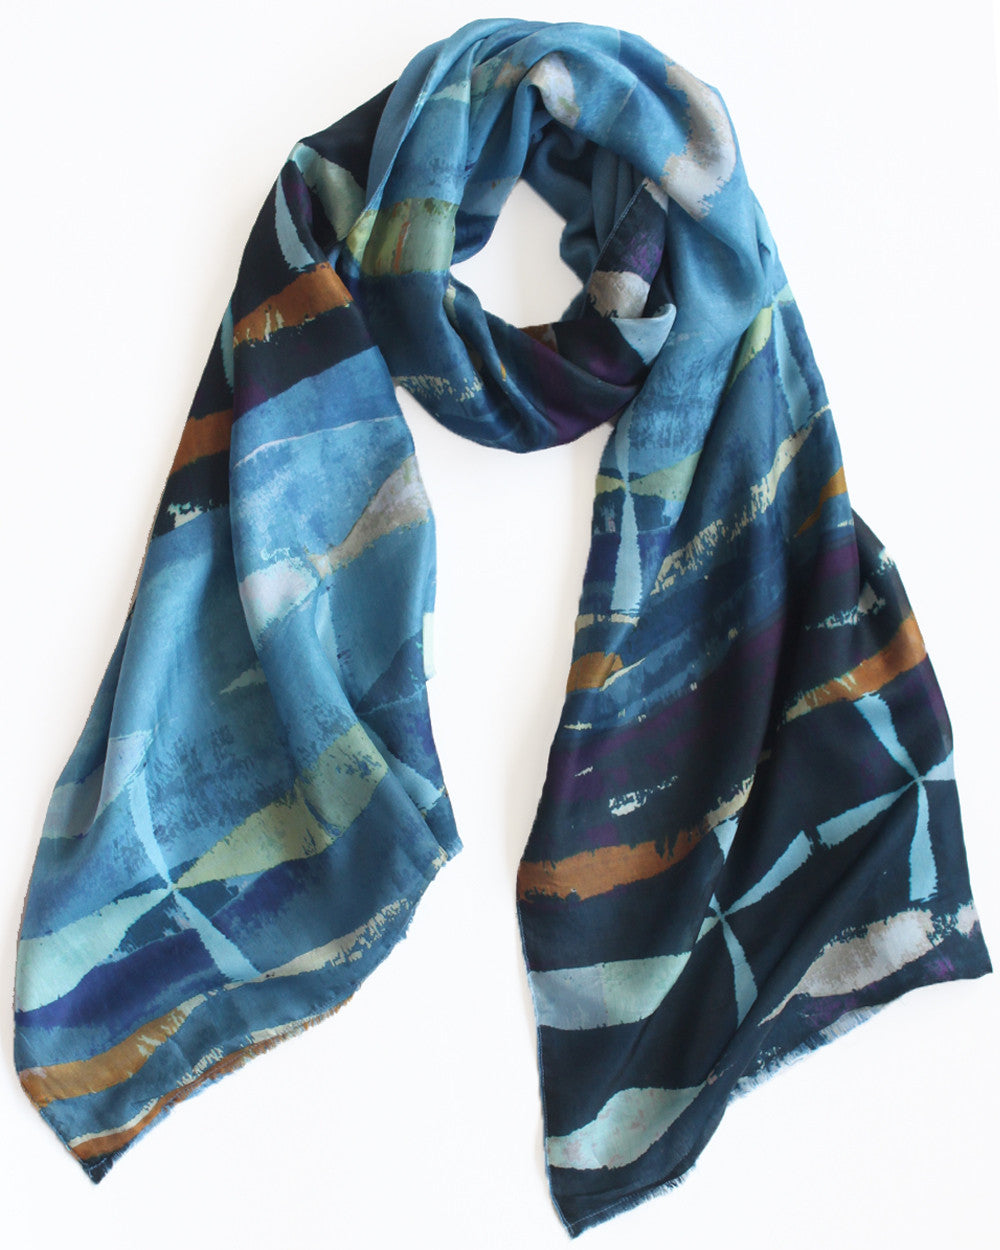 Atlantic - Silk scarf with wool backing - Things are Electric